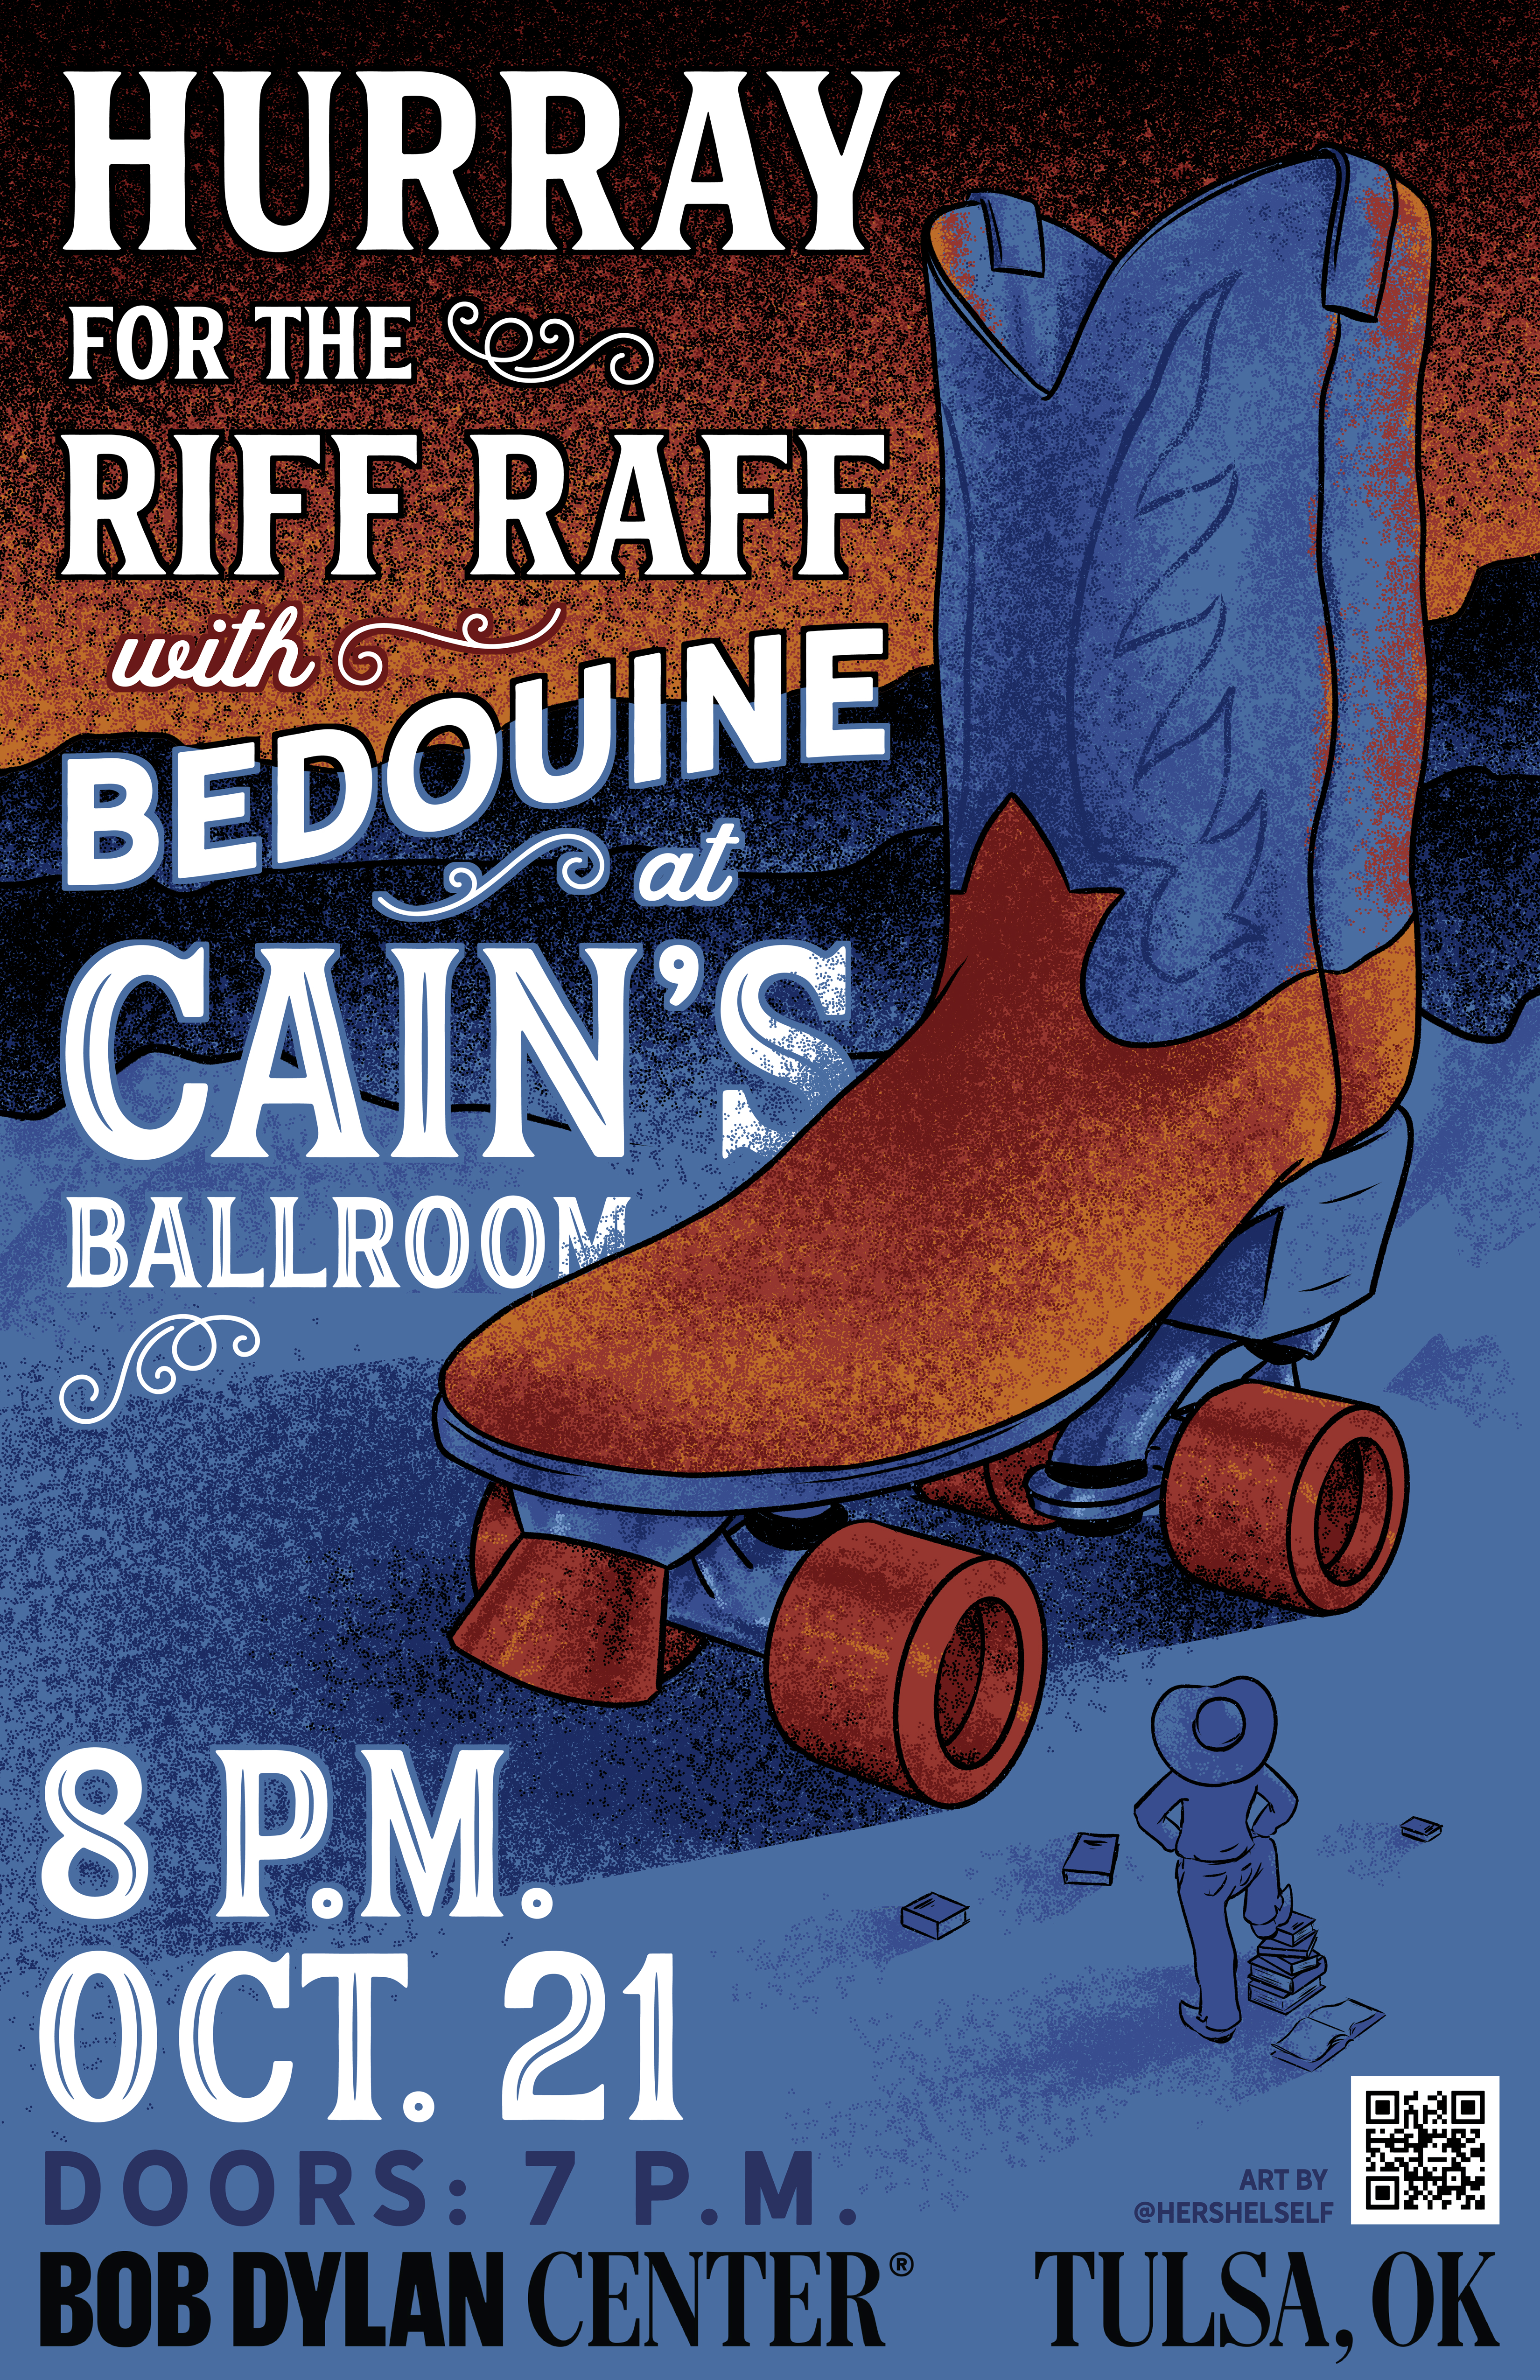 Hurray for the Riff Raff with Bedouine